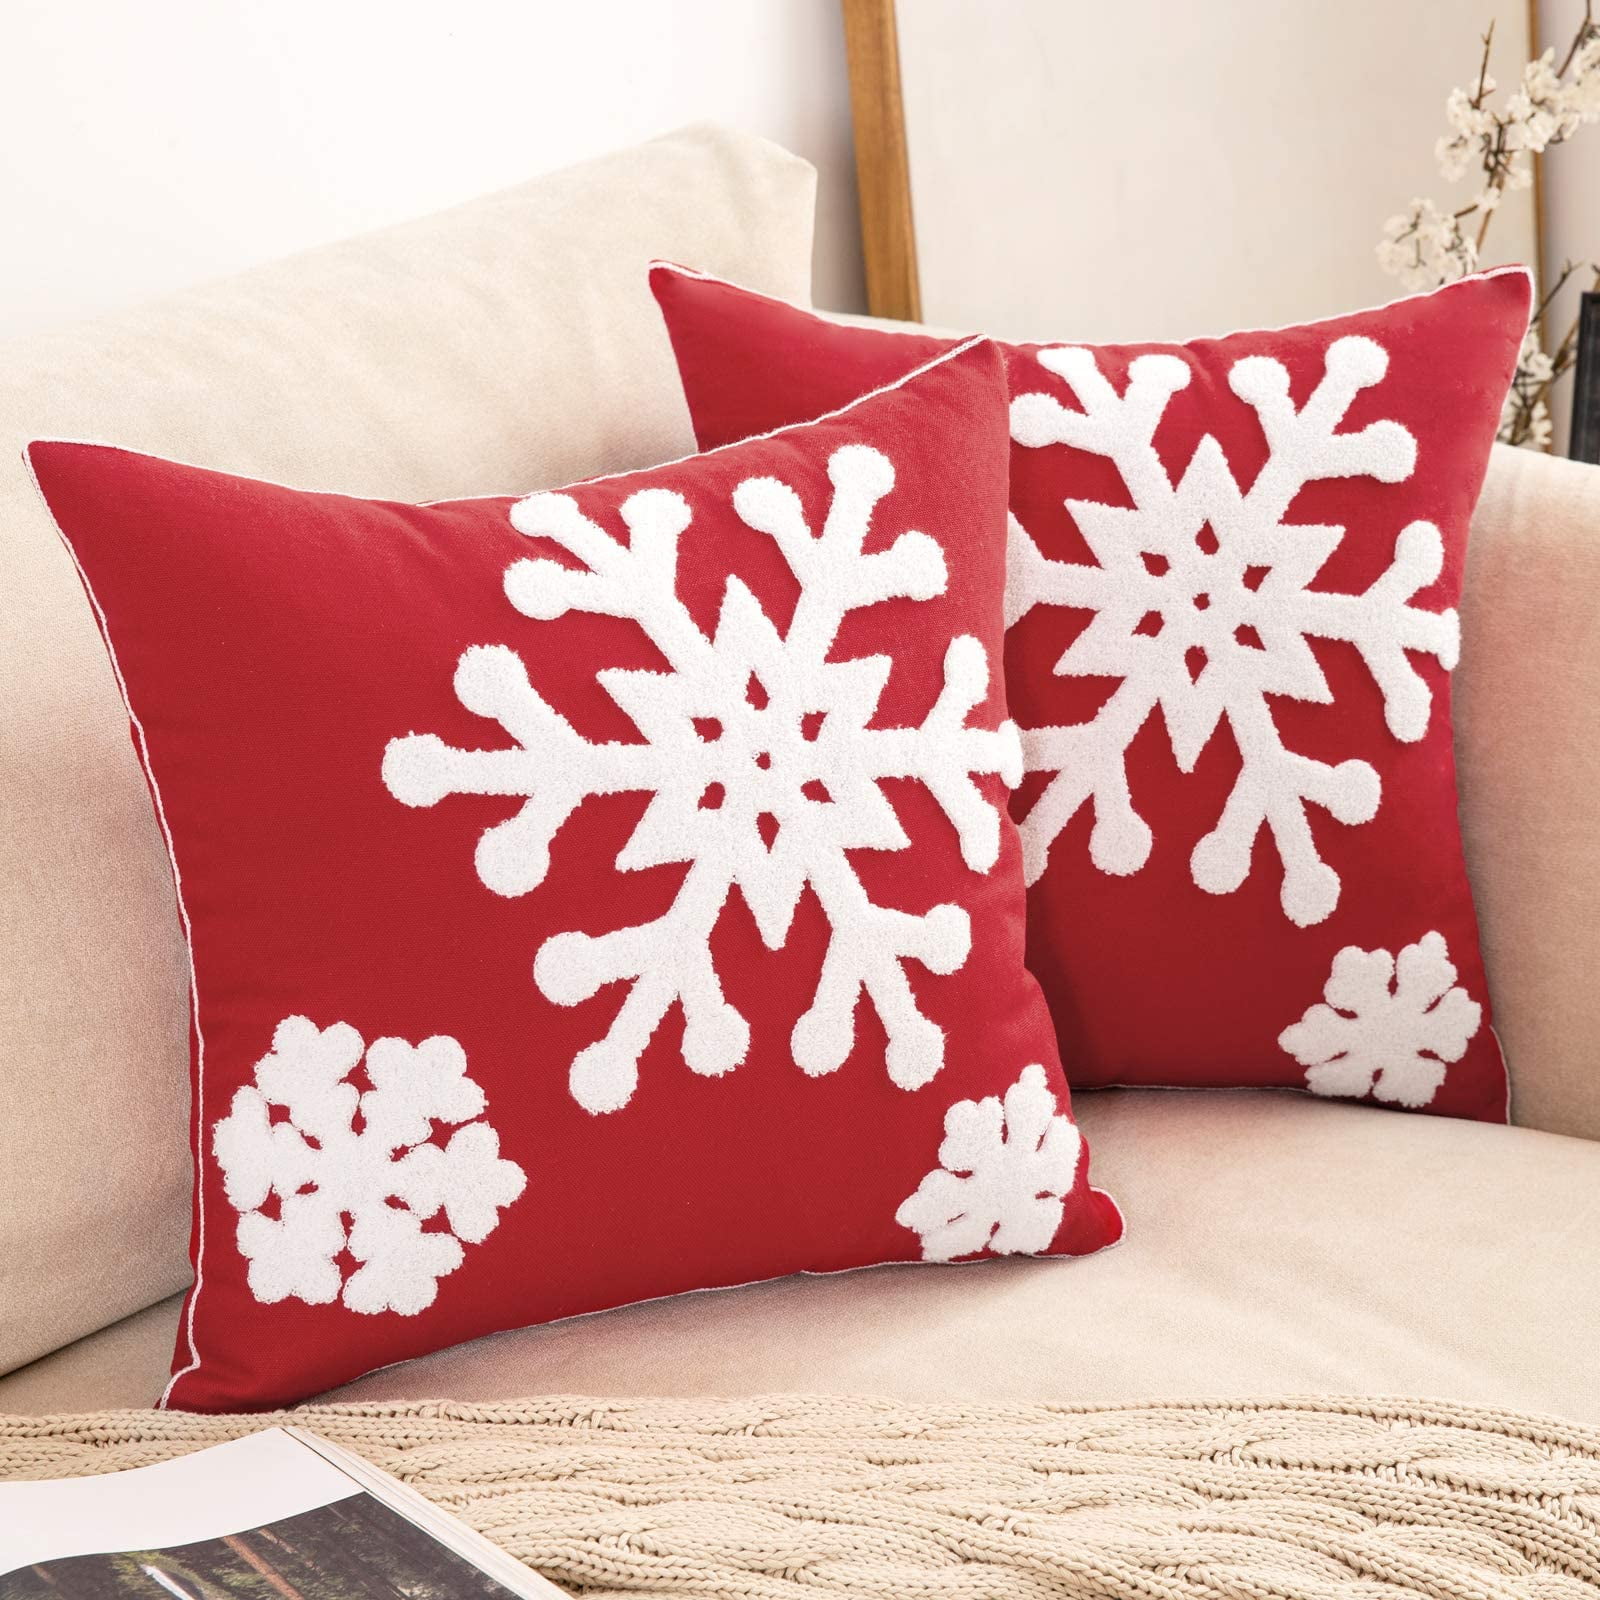 18x18in） MIULEE Pack of 2 Christmas Decorative Snowflake Throw Pillow Covers Canvas Embroidery Cushion Cases Holiday Decor Soft Pillowcases for Couch Sofa Bedroom Car（Red 